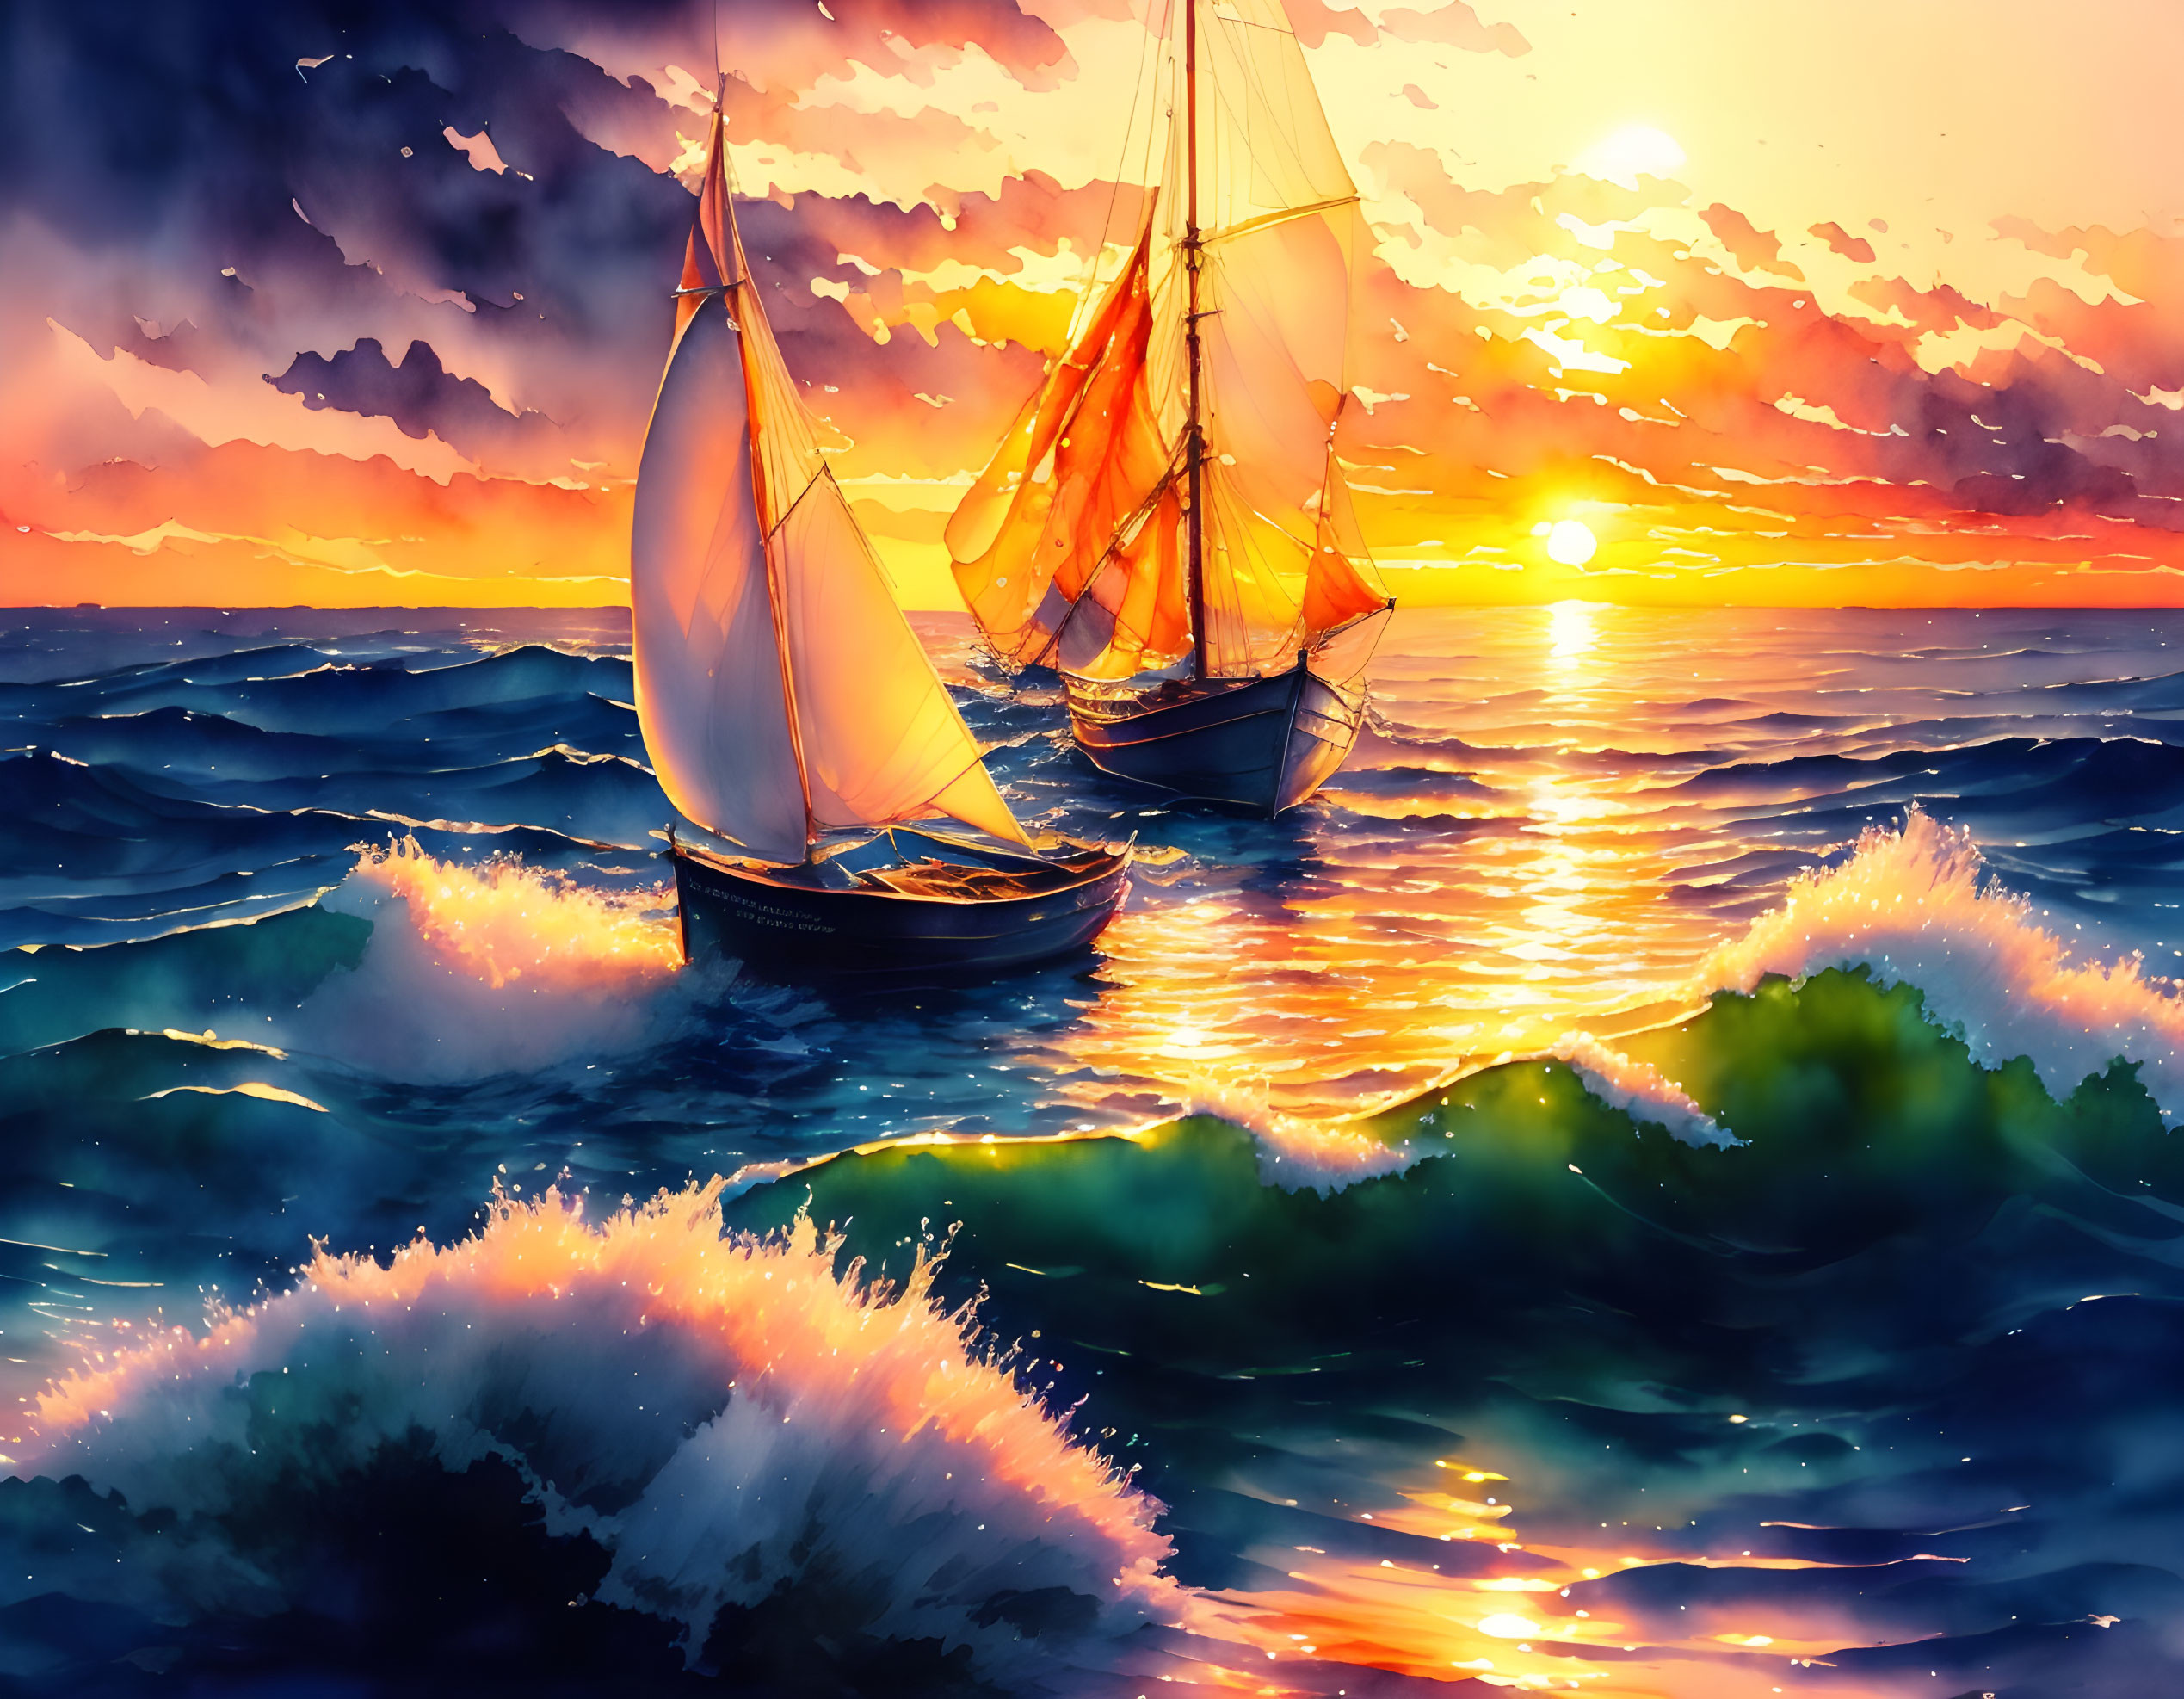 Sailboats in vibrant ocean waves at sunset